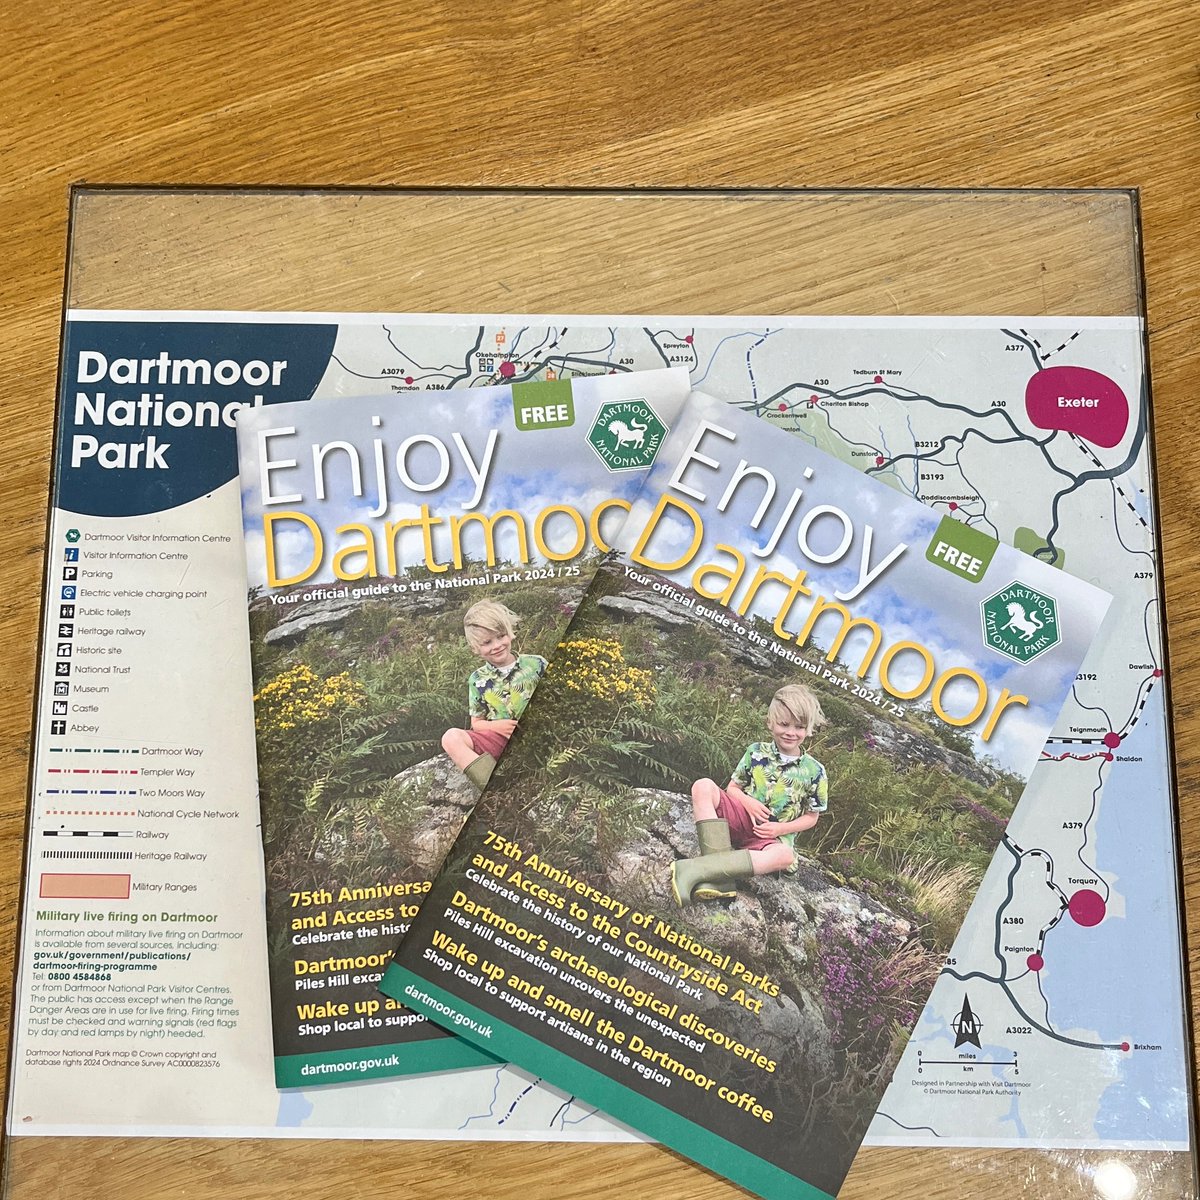 Calling all Dartmoor enthusiasts 💚 have you grabbed your FREE copy of our newest Enjoy Dartmoor Magazine? Full of wonderful articles, and Dartmoor information! Available now at all our Visitor Centres, or you can view it online 👉 bit.ly/3uqHMLd